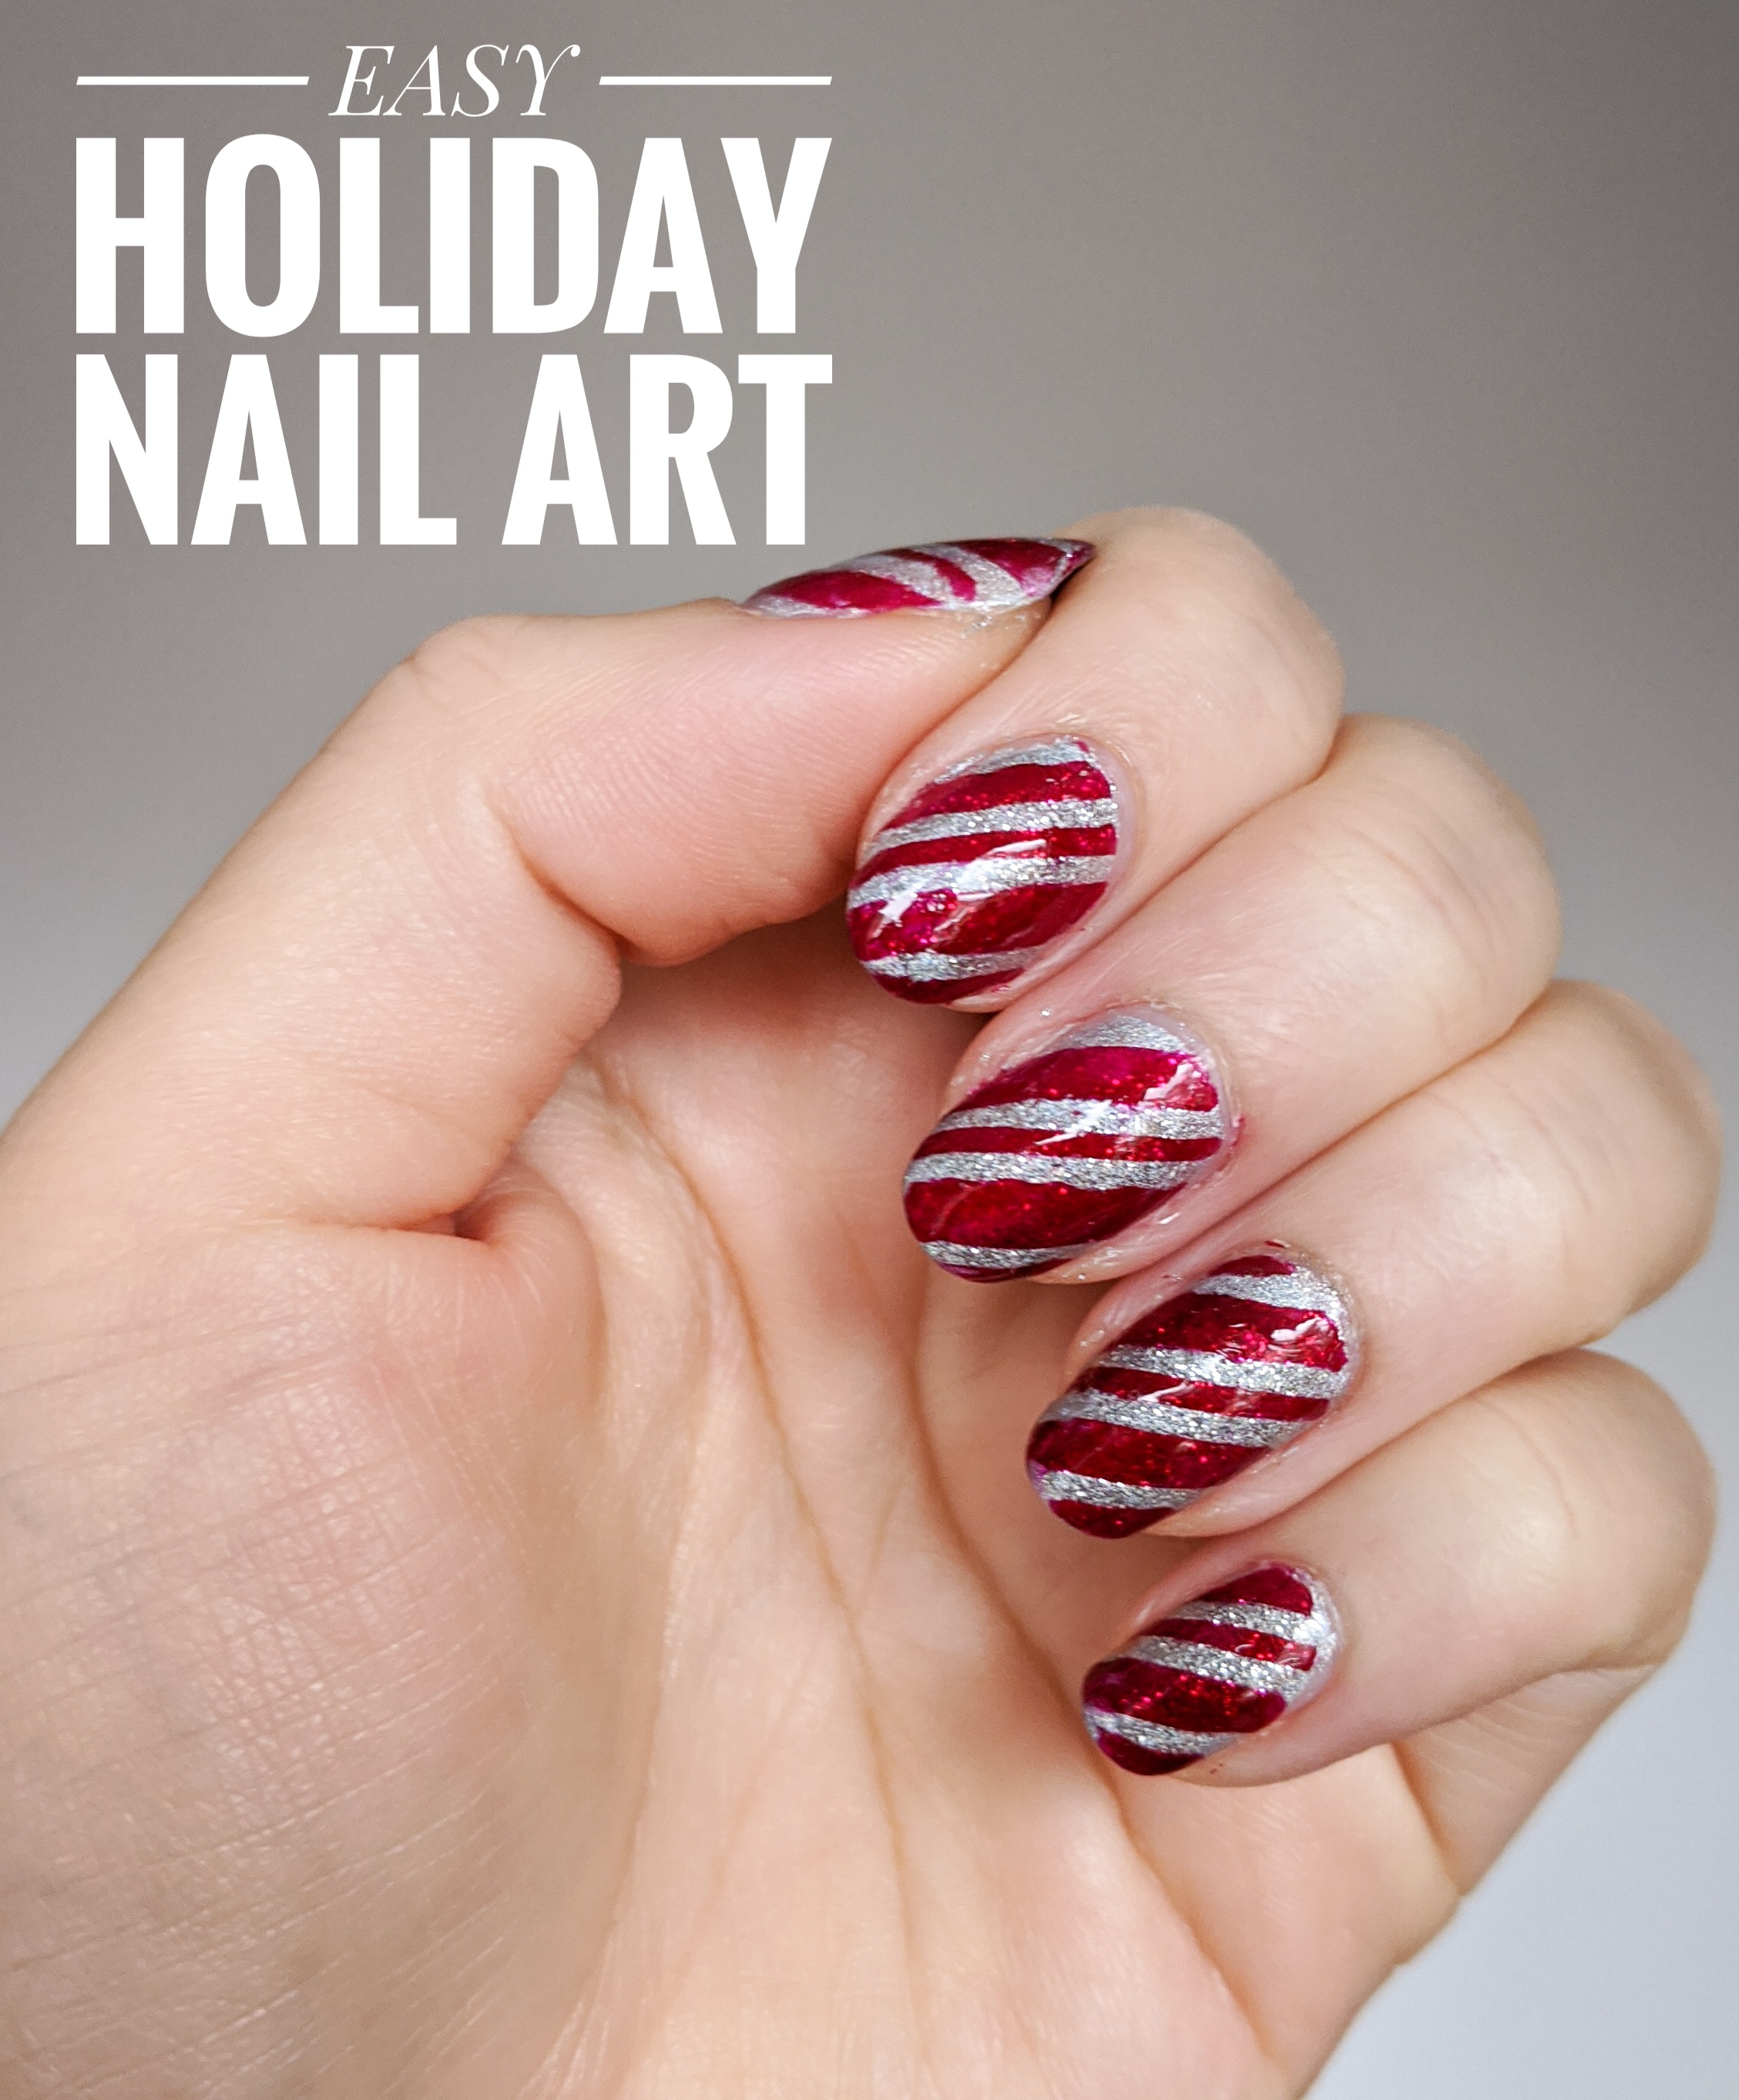 Christmas Nail Art For Beginners Using A TOOTHPICK! - YouTube